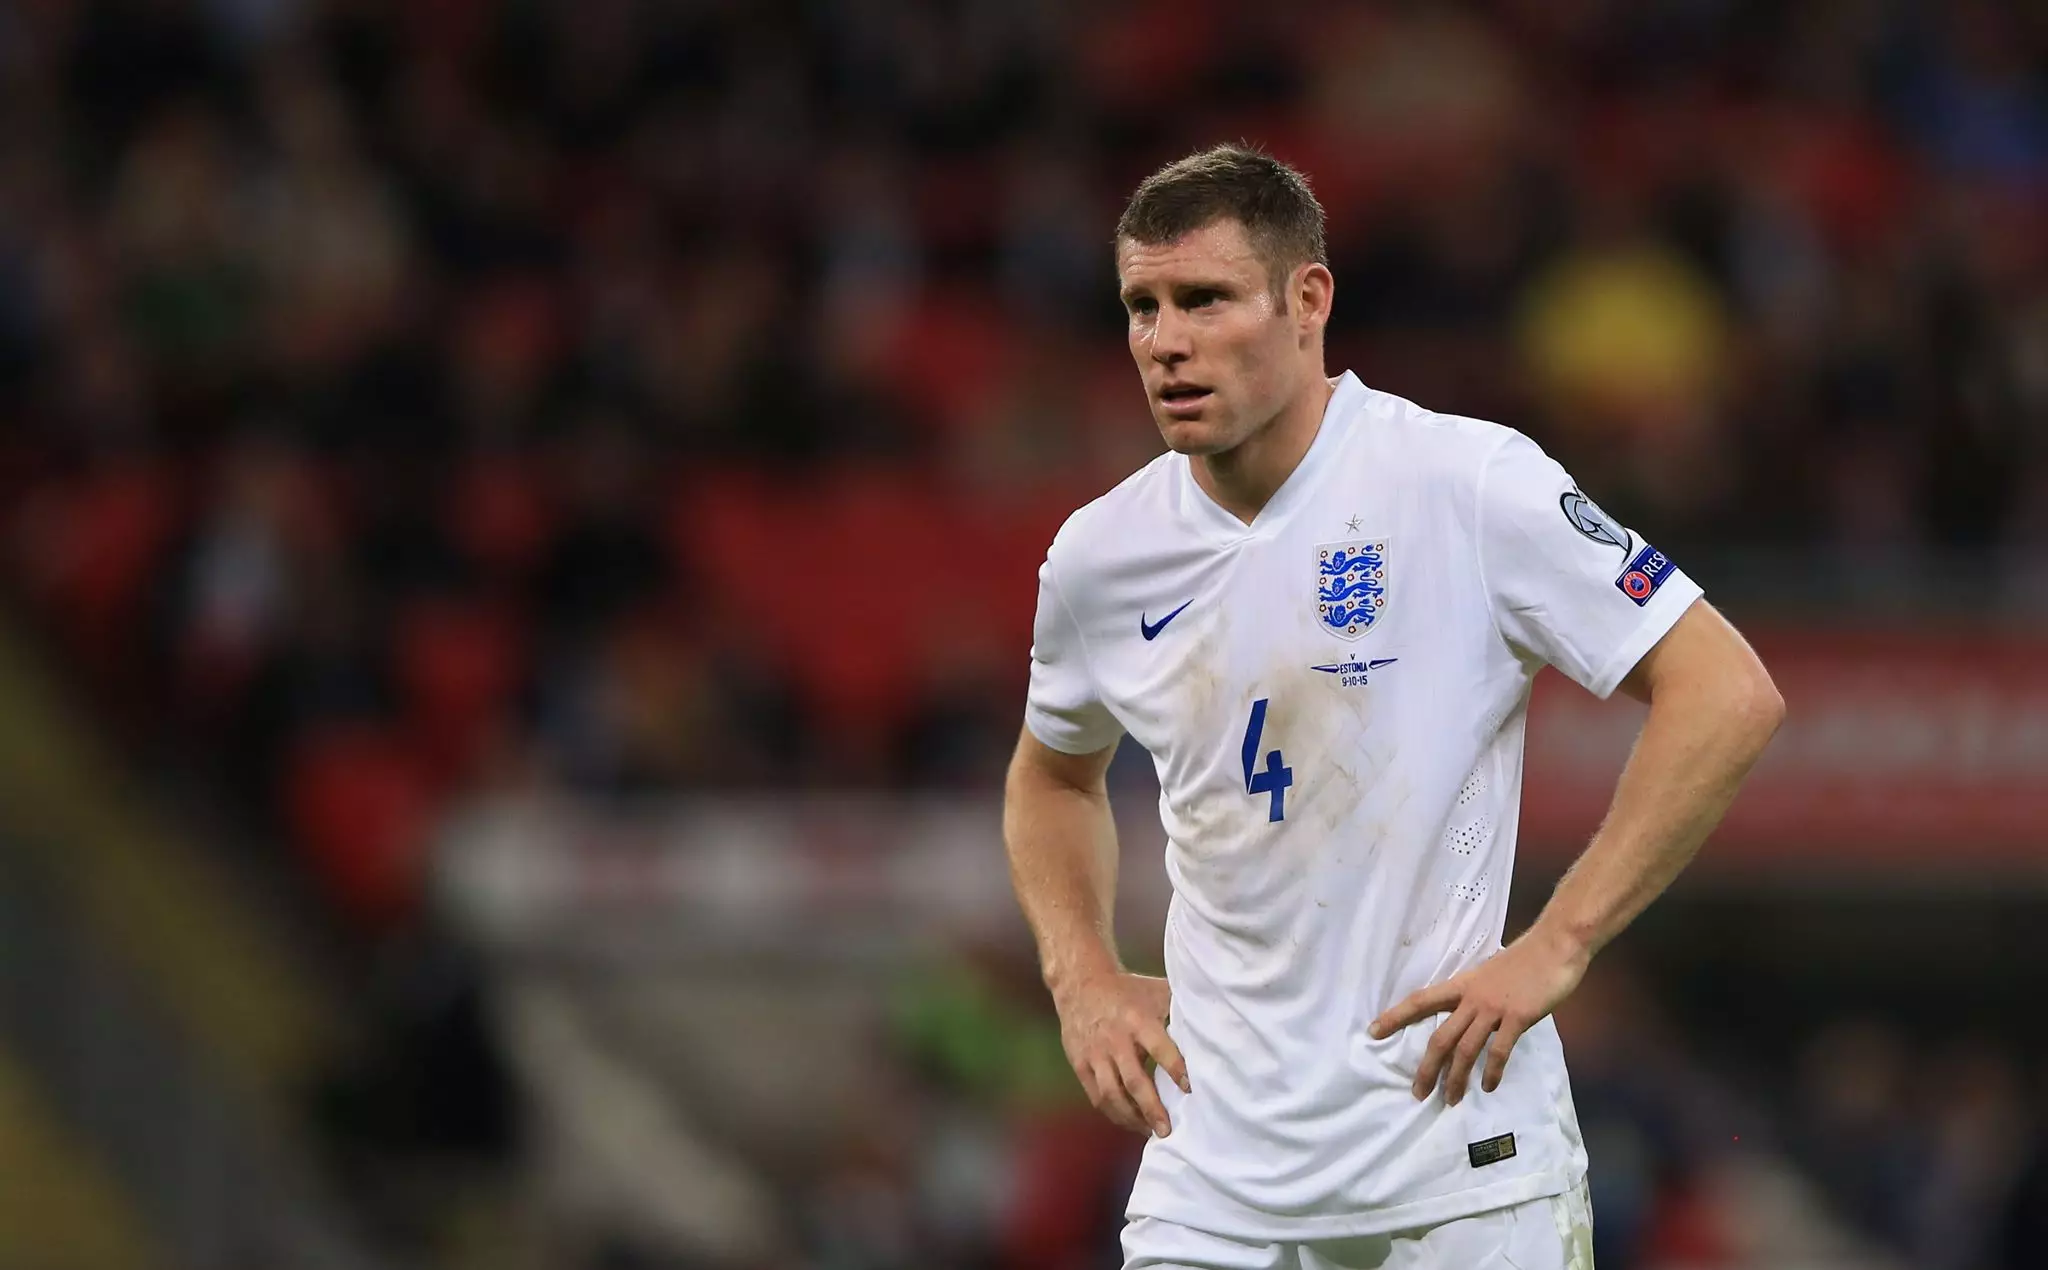 Milner last played for England two years ago. Image: PA Images